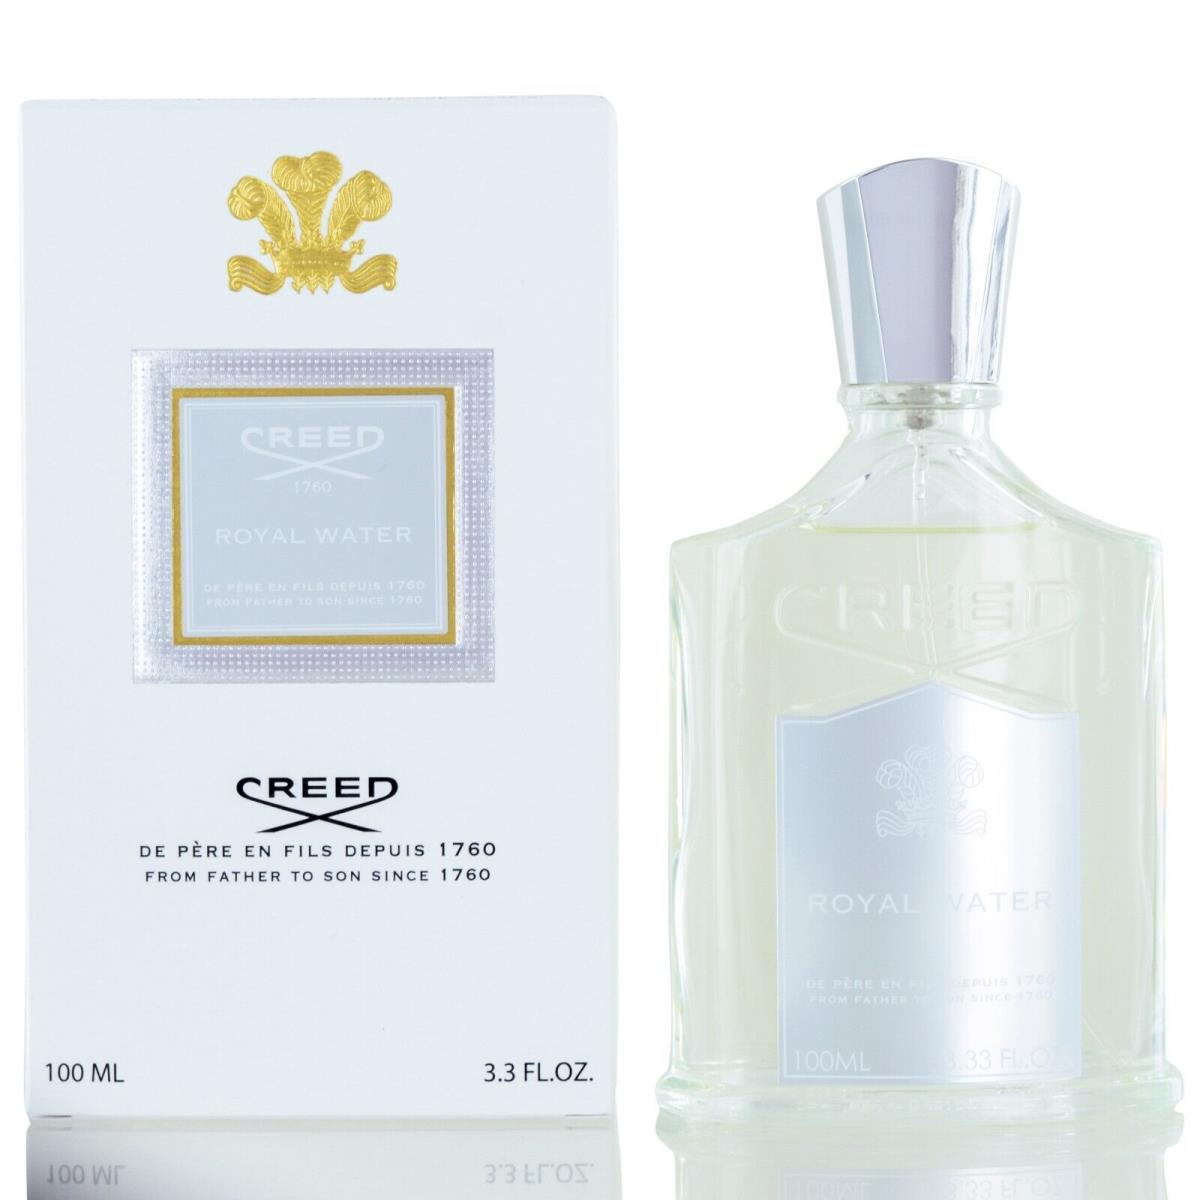 Creed Royal Water BY Creed Edp Spray 3.3 OZ For Unisex